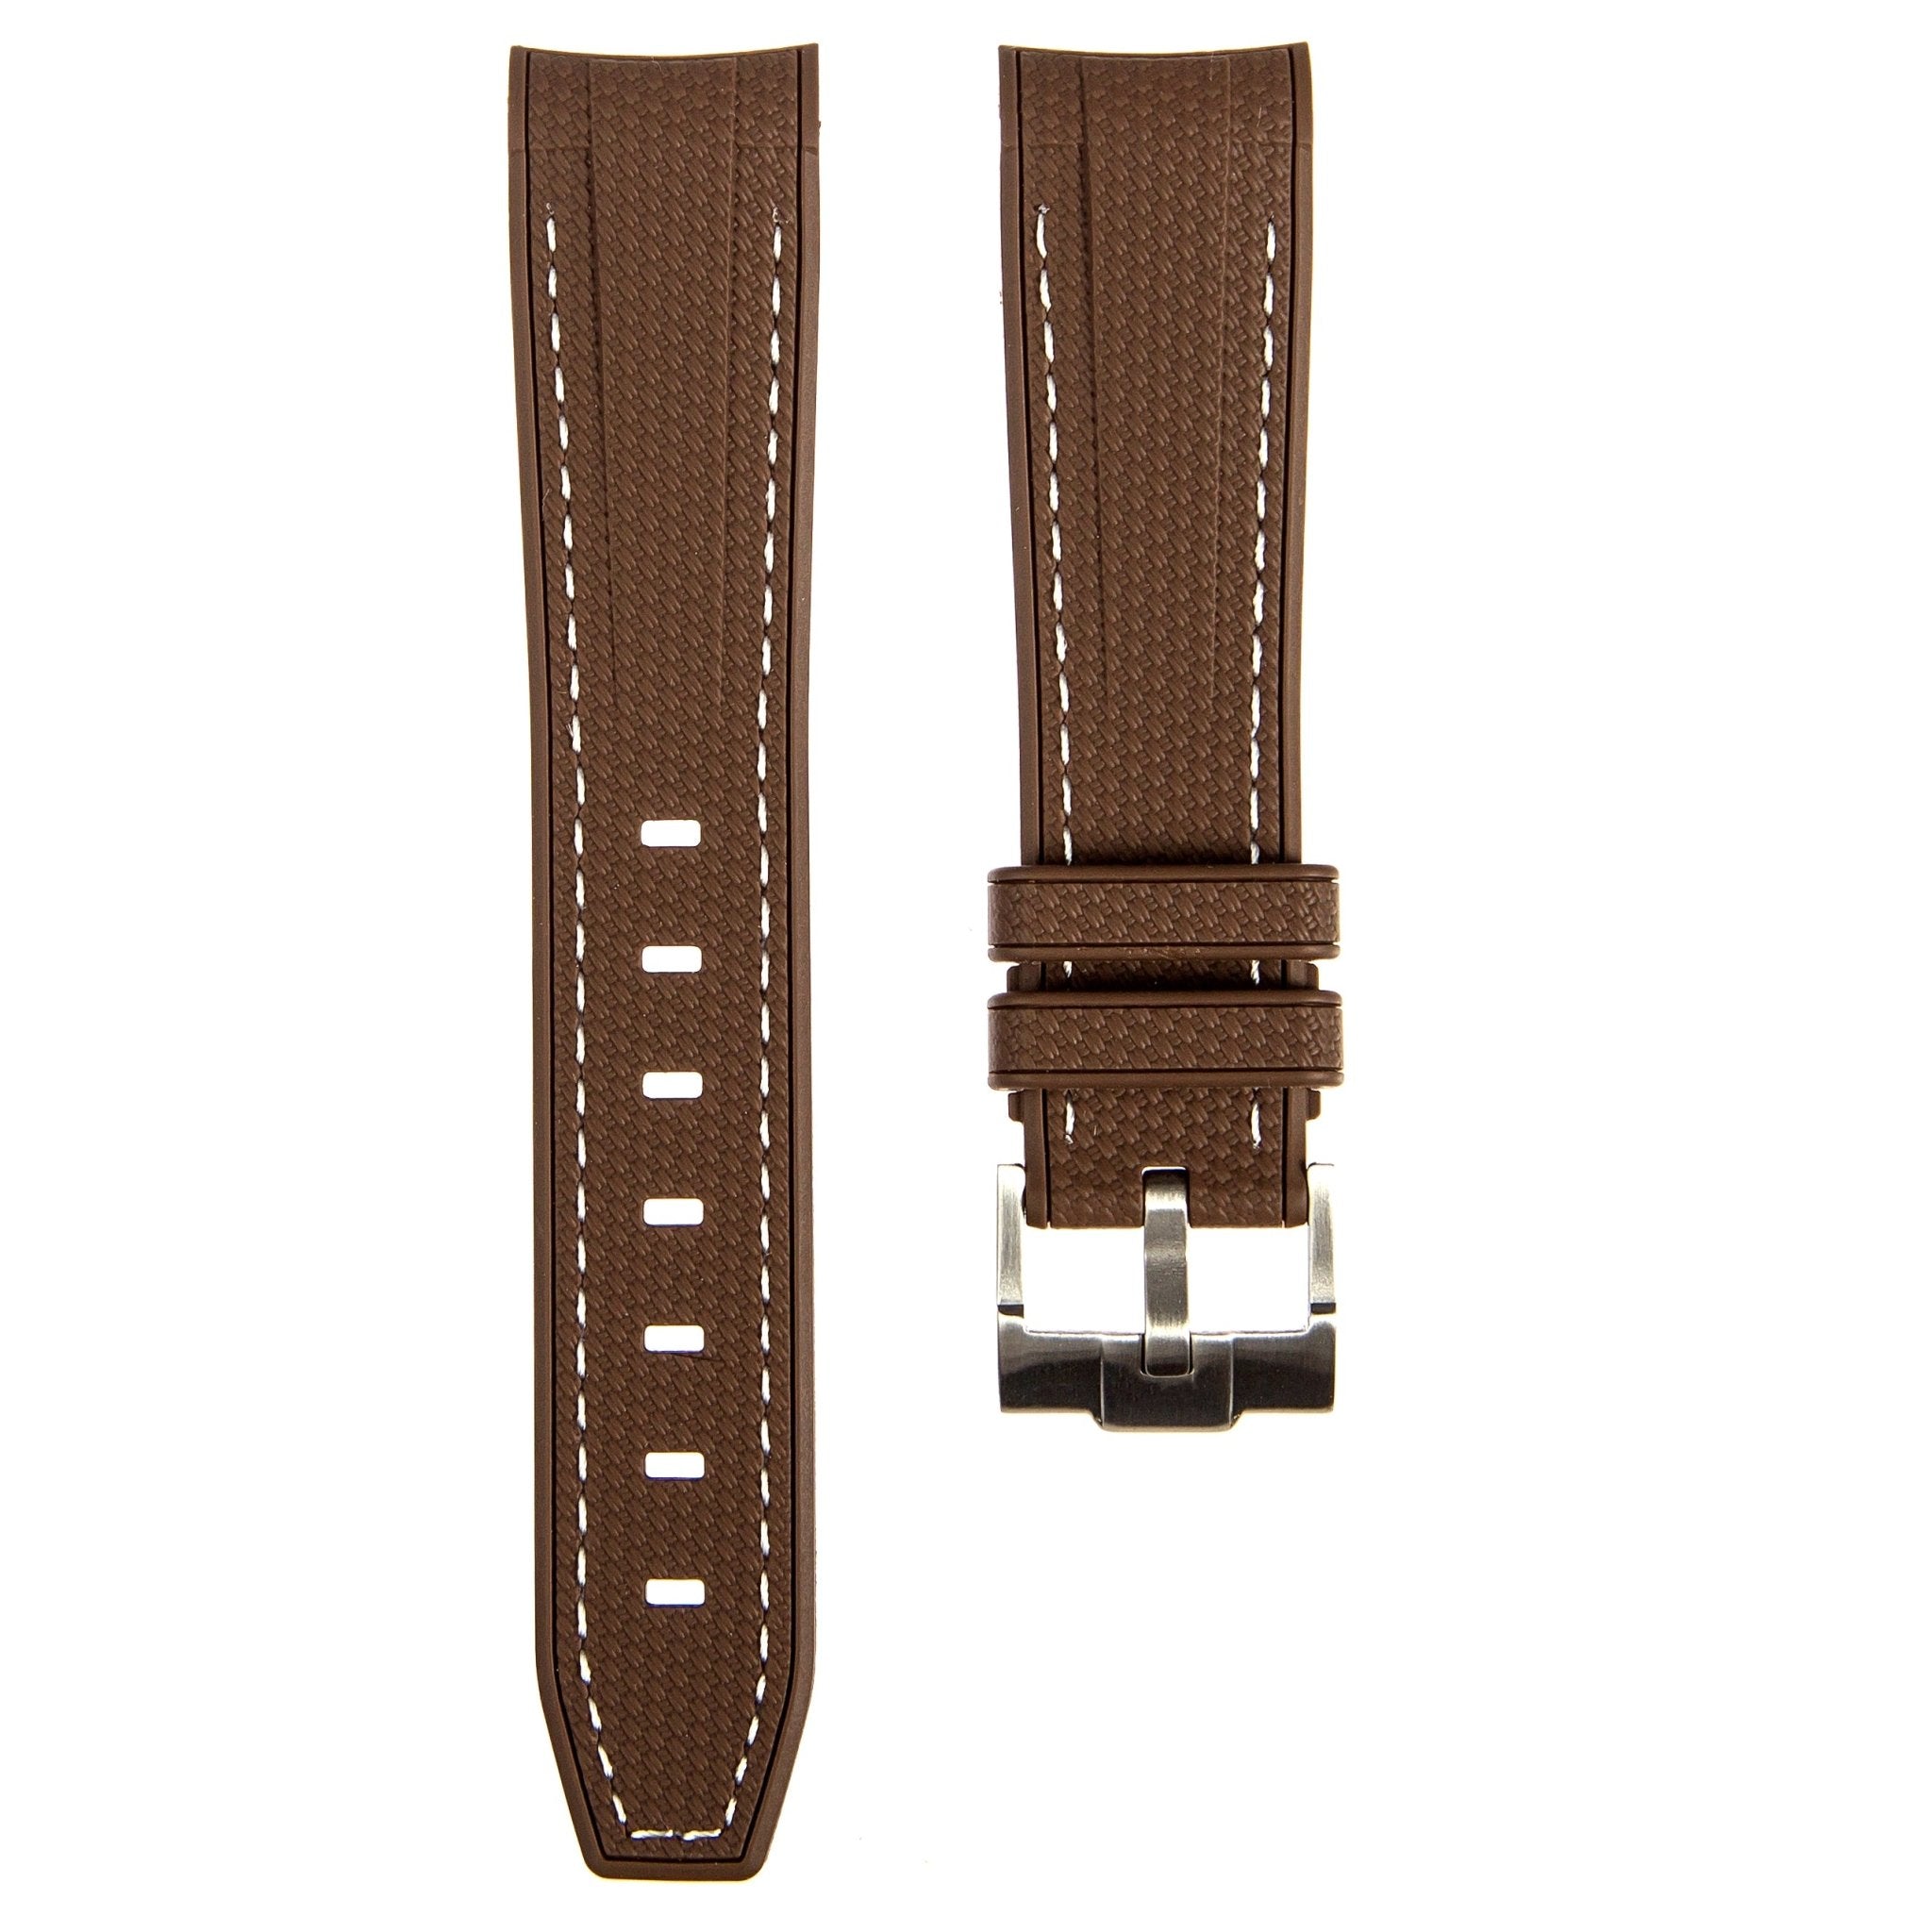 Textured Curved End Premium Silicone Strap – Compatible with Rolex Submariner – Brown with White Stitch (2405) -StrapSeeker